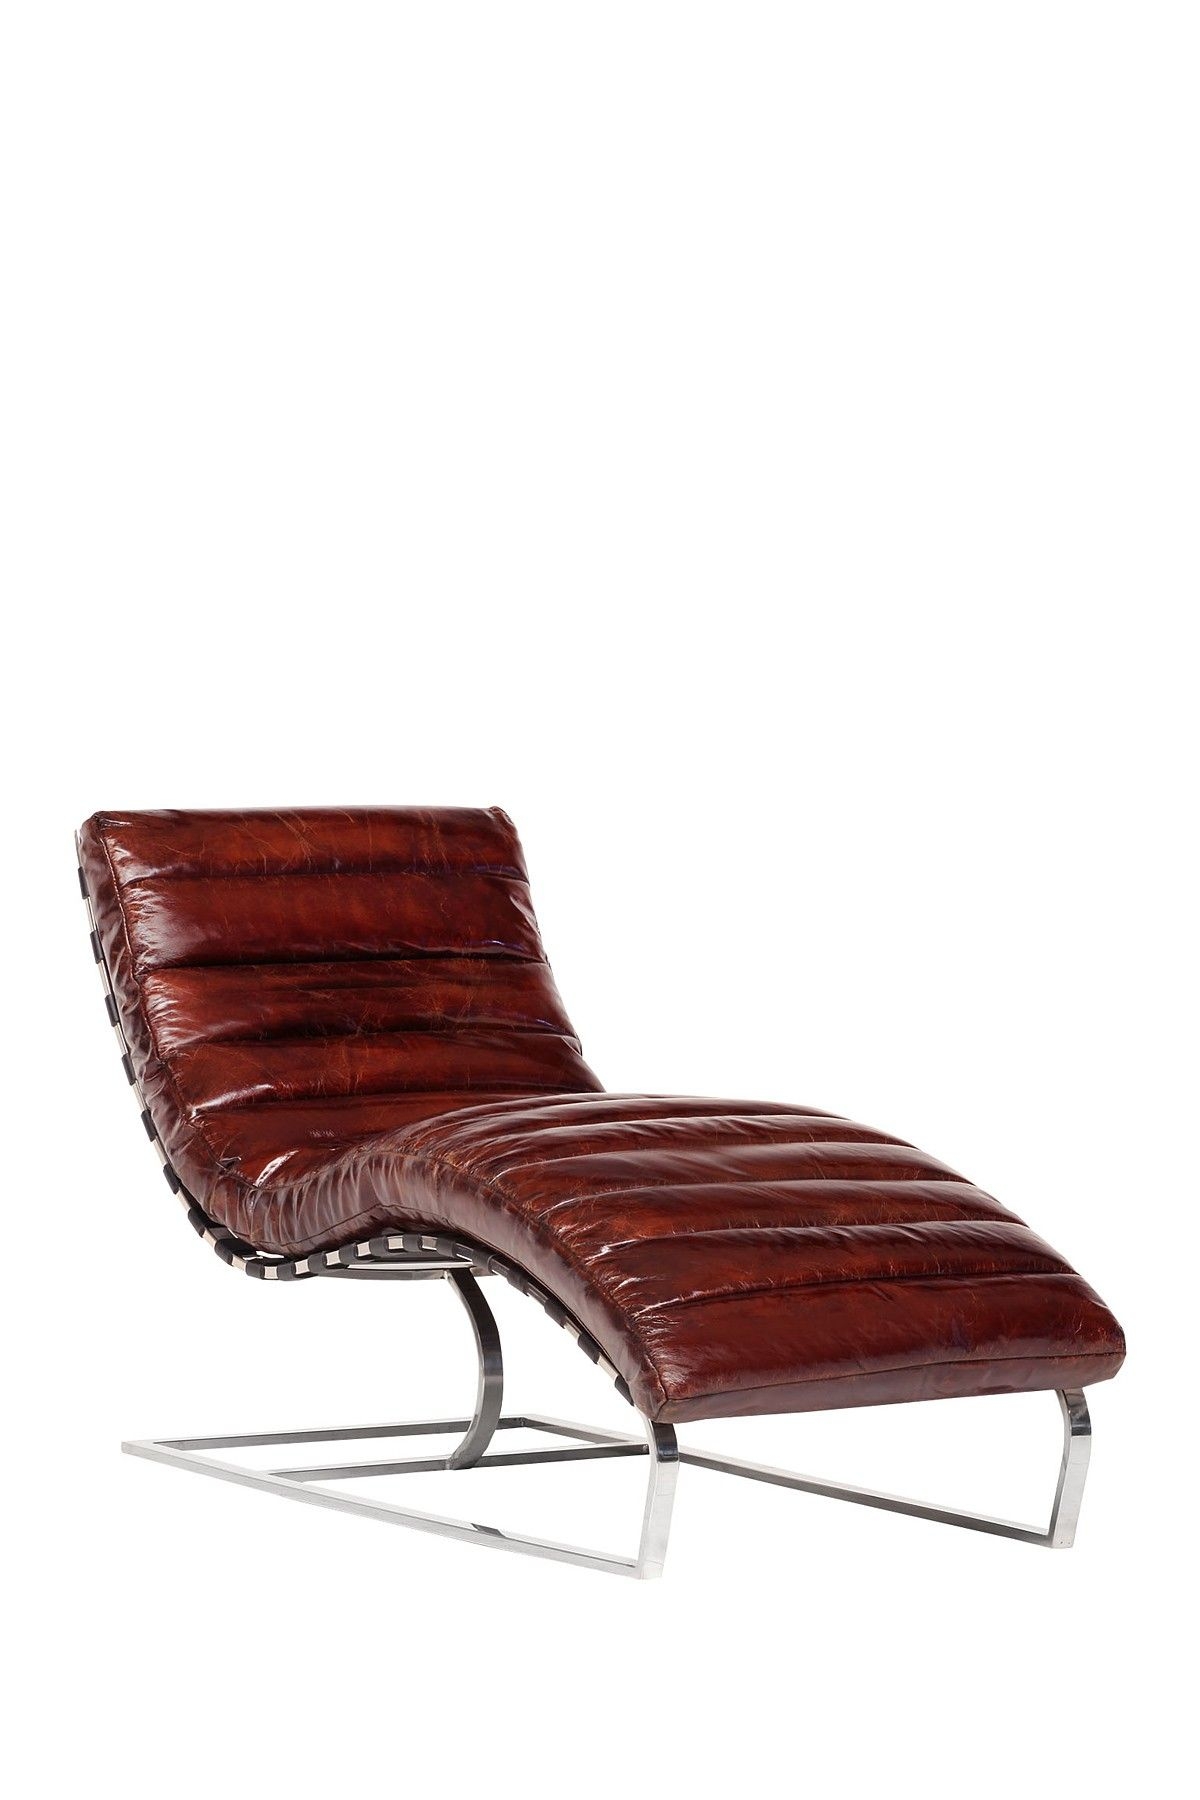 Leather chaise lounge chairs 18